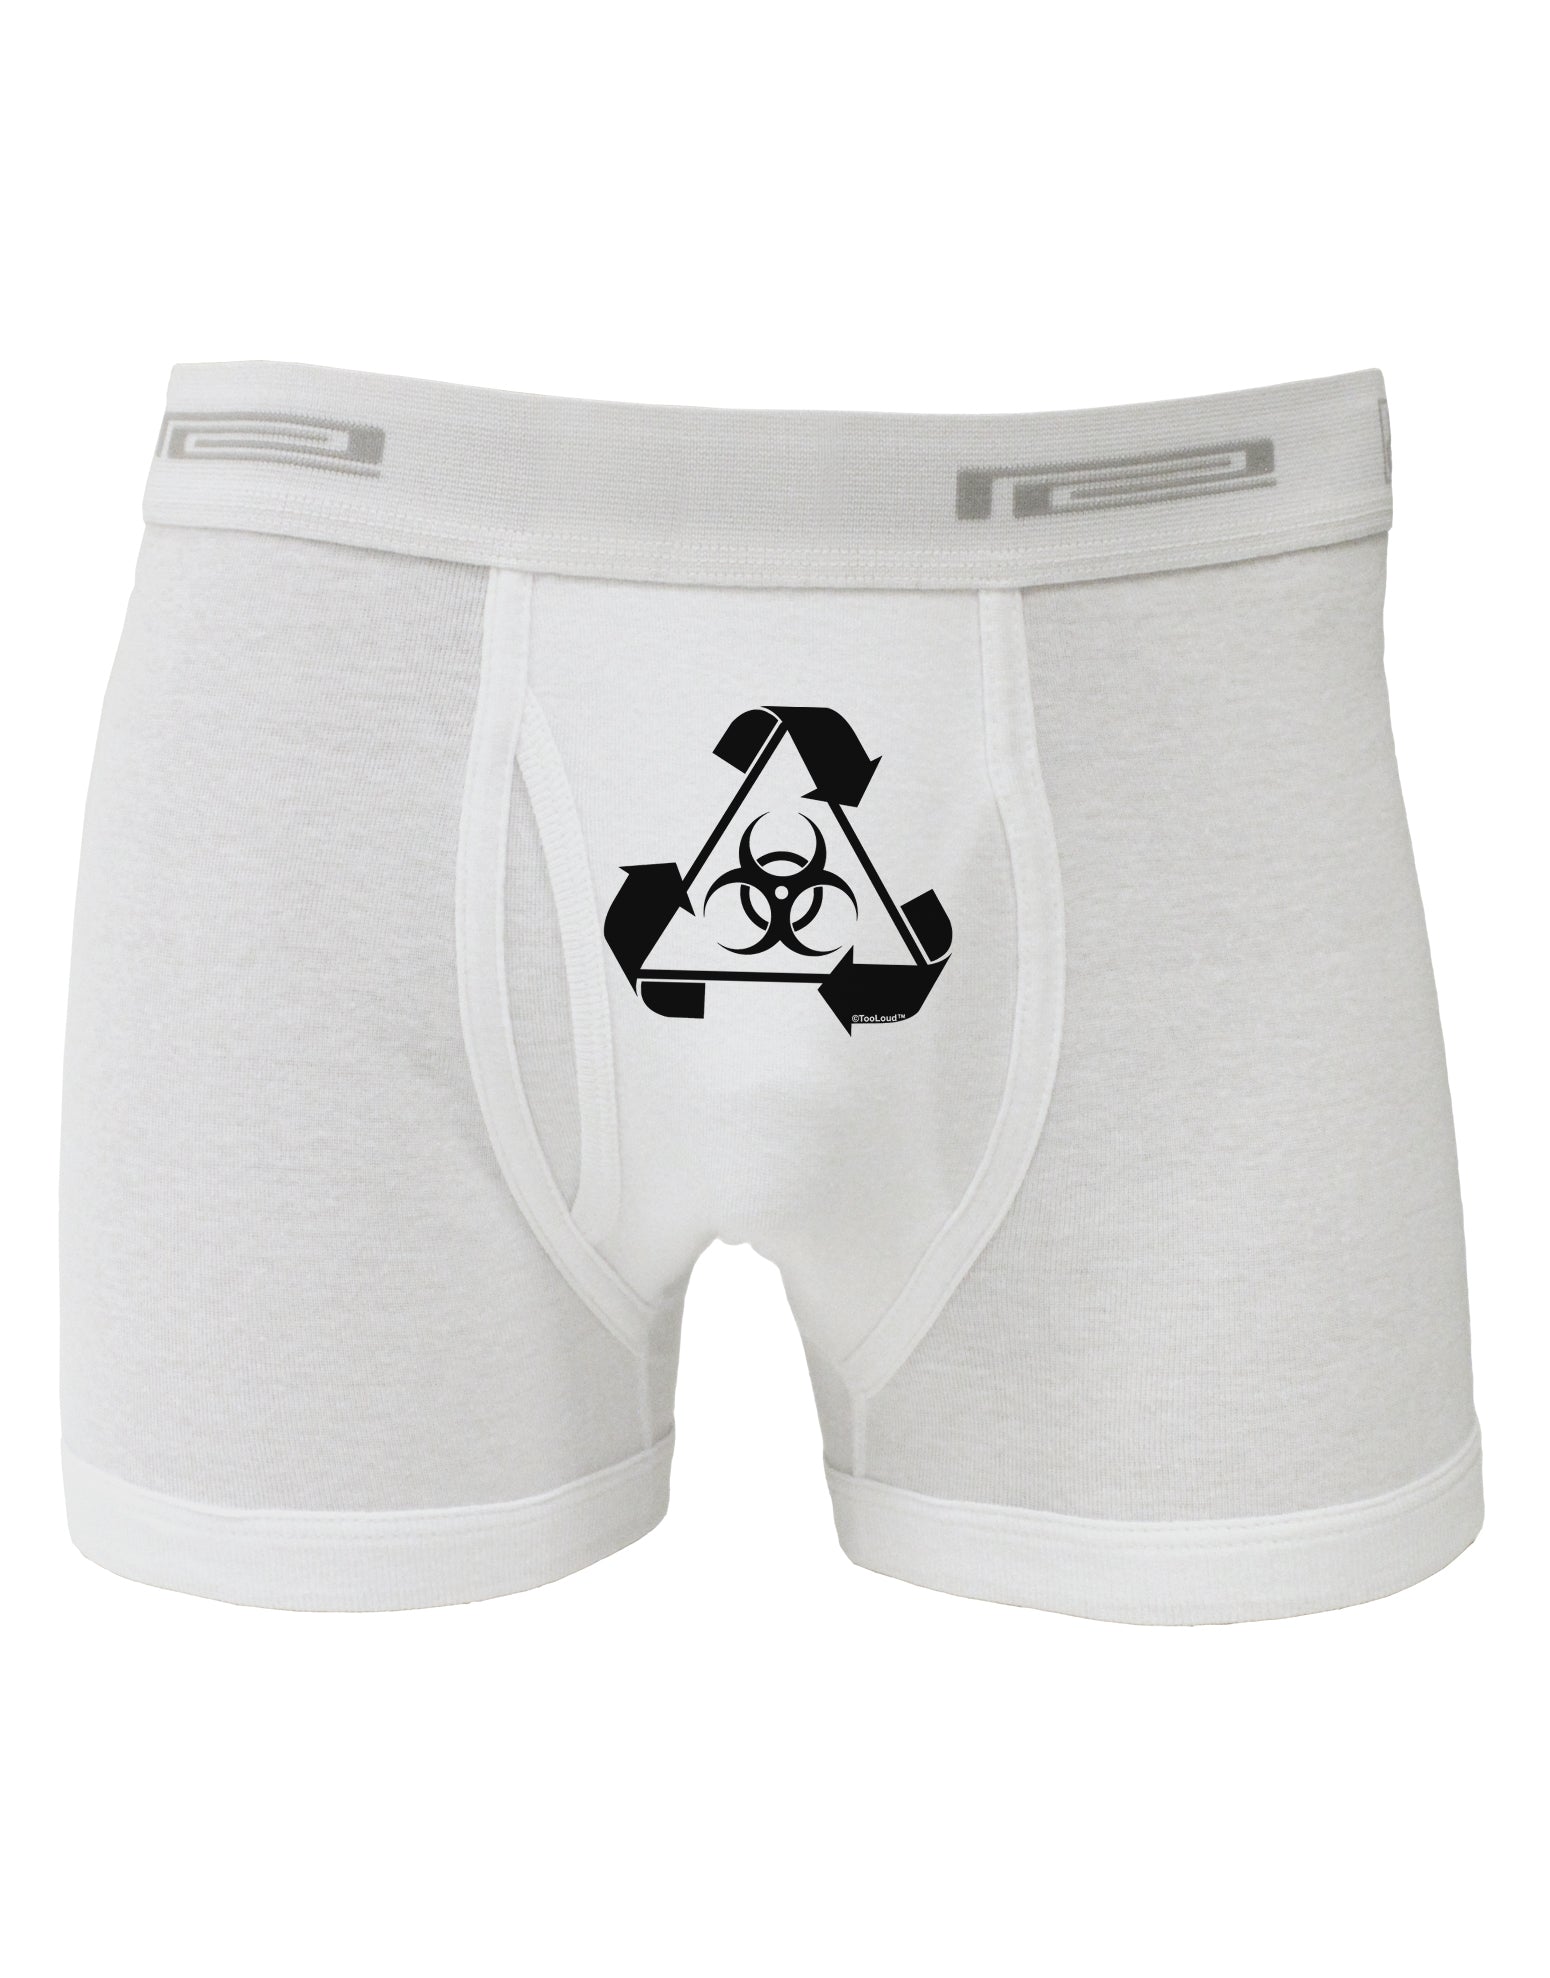 Recycle Biohazard Sign Side Printed Mens Trunk Underwear by TooLoud